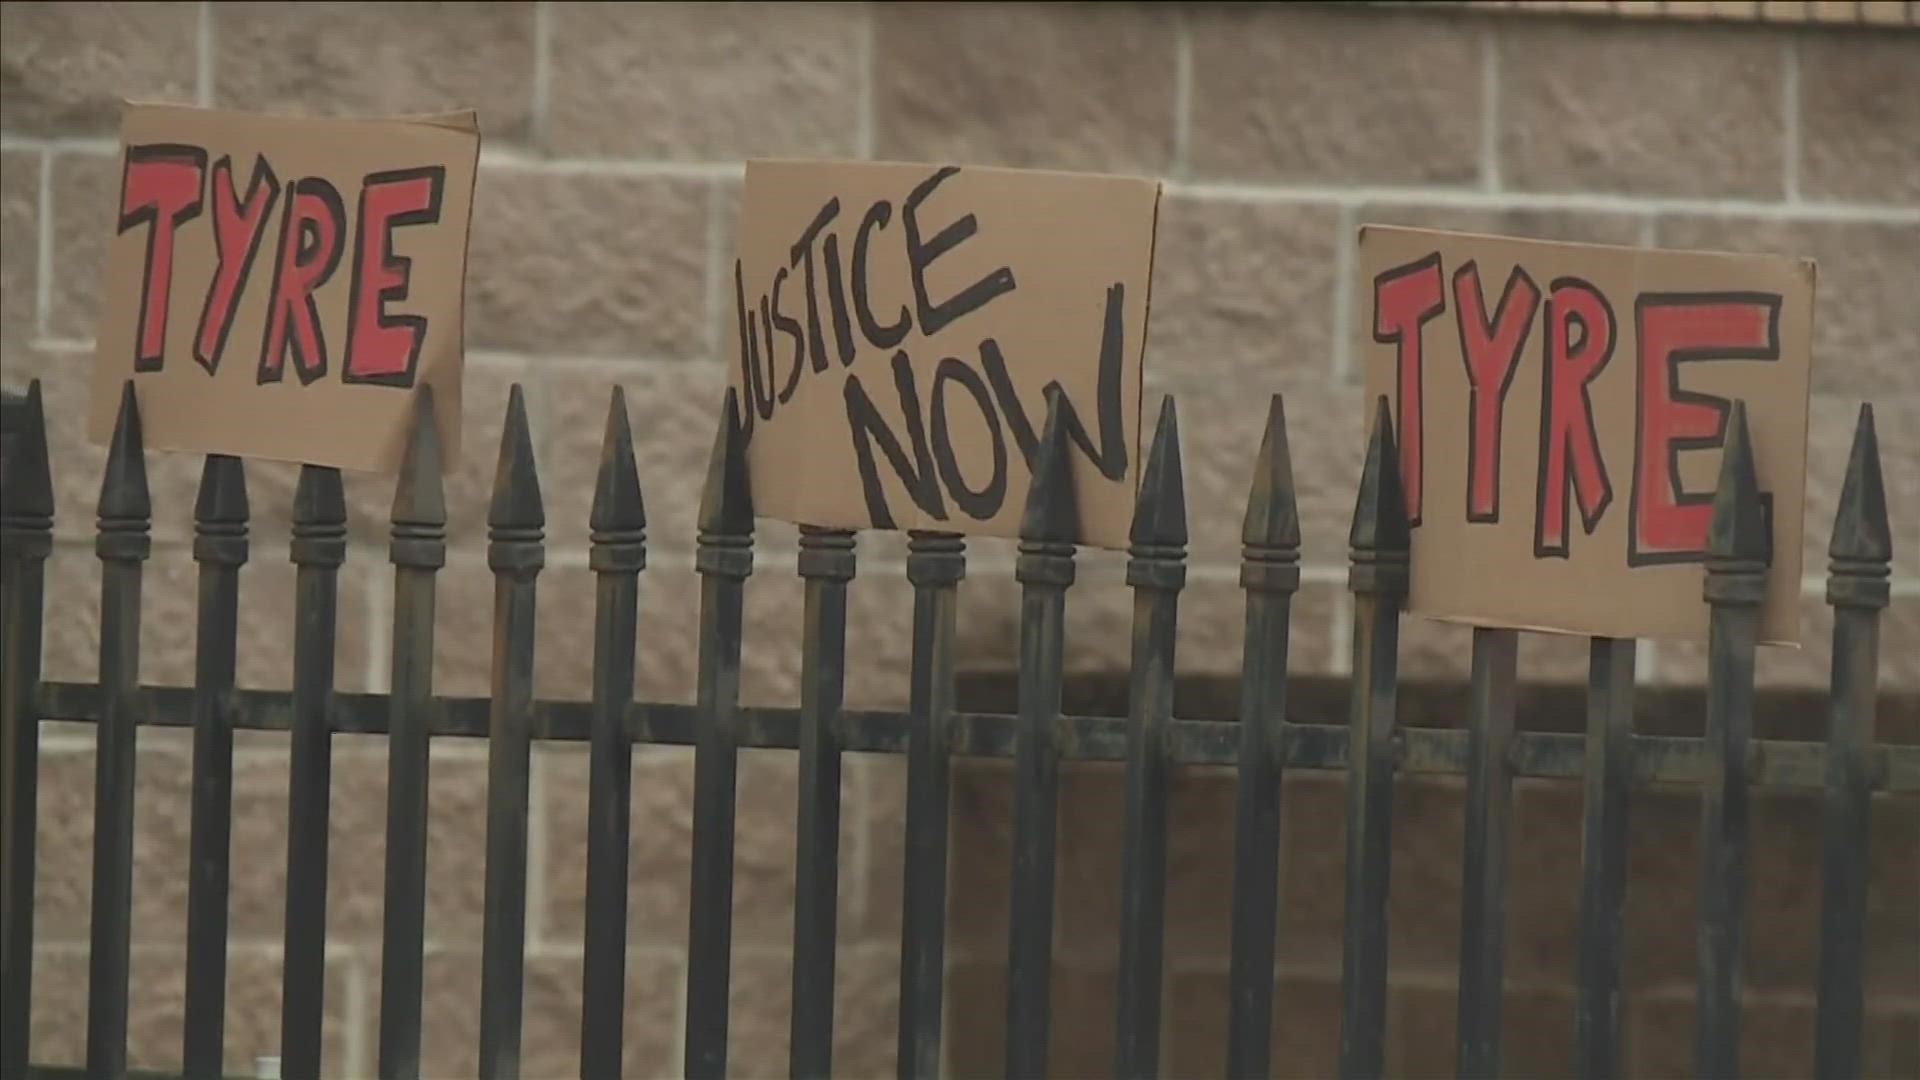 Protesters at the Ridgeway police station remained silent for three minutes, signifying the three minutes Nichols was beaten by Memphis police officers.